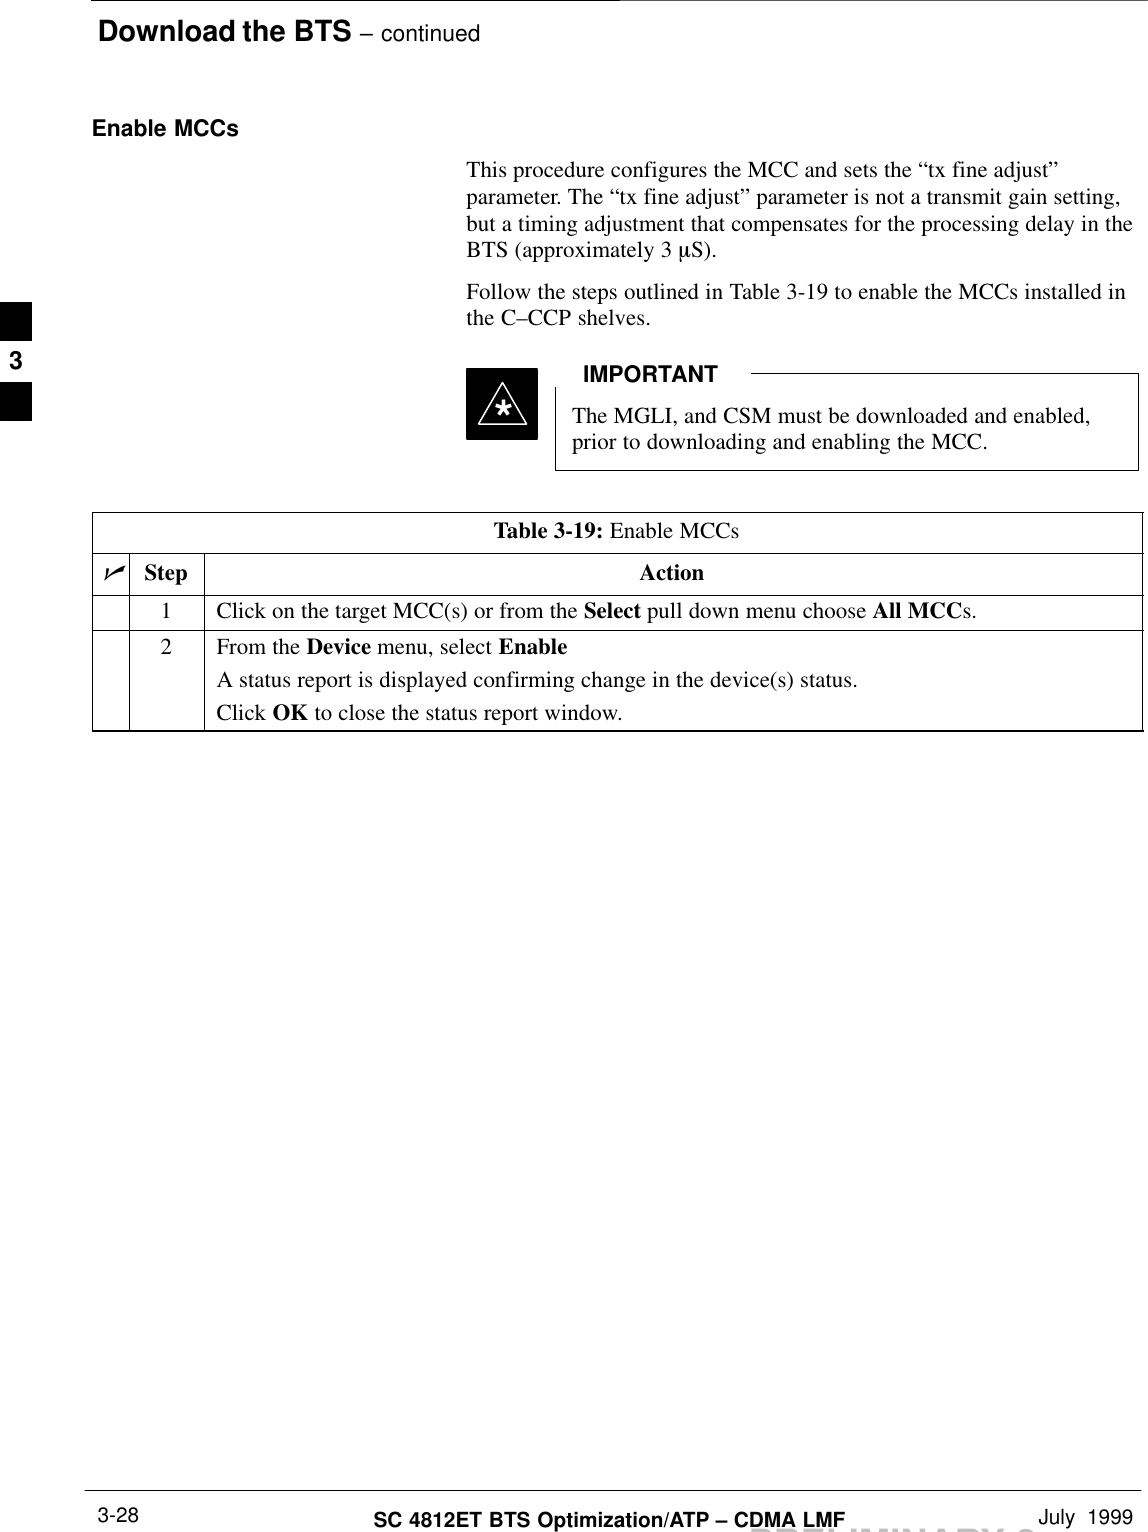 Download the BTS – continuedPRELIMINARY 2SC 4812ET BTS Optimization/ATP – CDMA LMF July  19993-28Enable MCCsThis procedure configures the MCC and sets the “tx fine adjust”parameter. The “tx fine adjust” parameter is not a transmit gain setting,but a timing adjustment that compensates for the processing delay in theBTS (approximately 3 mS).Follow the steps outlined in Table 3-19 to enable the MCCs installed inthe C–CCP shelves.The MGLI, and CSM must be downloaded and enabled,prior to downloading and enabling the MCC.IMPORTANT*Table 3-19: Enable MCCsnStep Action1Click on the target MCC(s) or from the Select pull down menu choose All MCCs.2From the Device menu, select EnableA status report is displayed confirming change in the device(s) status.Click OK to close the status report window. 3